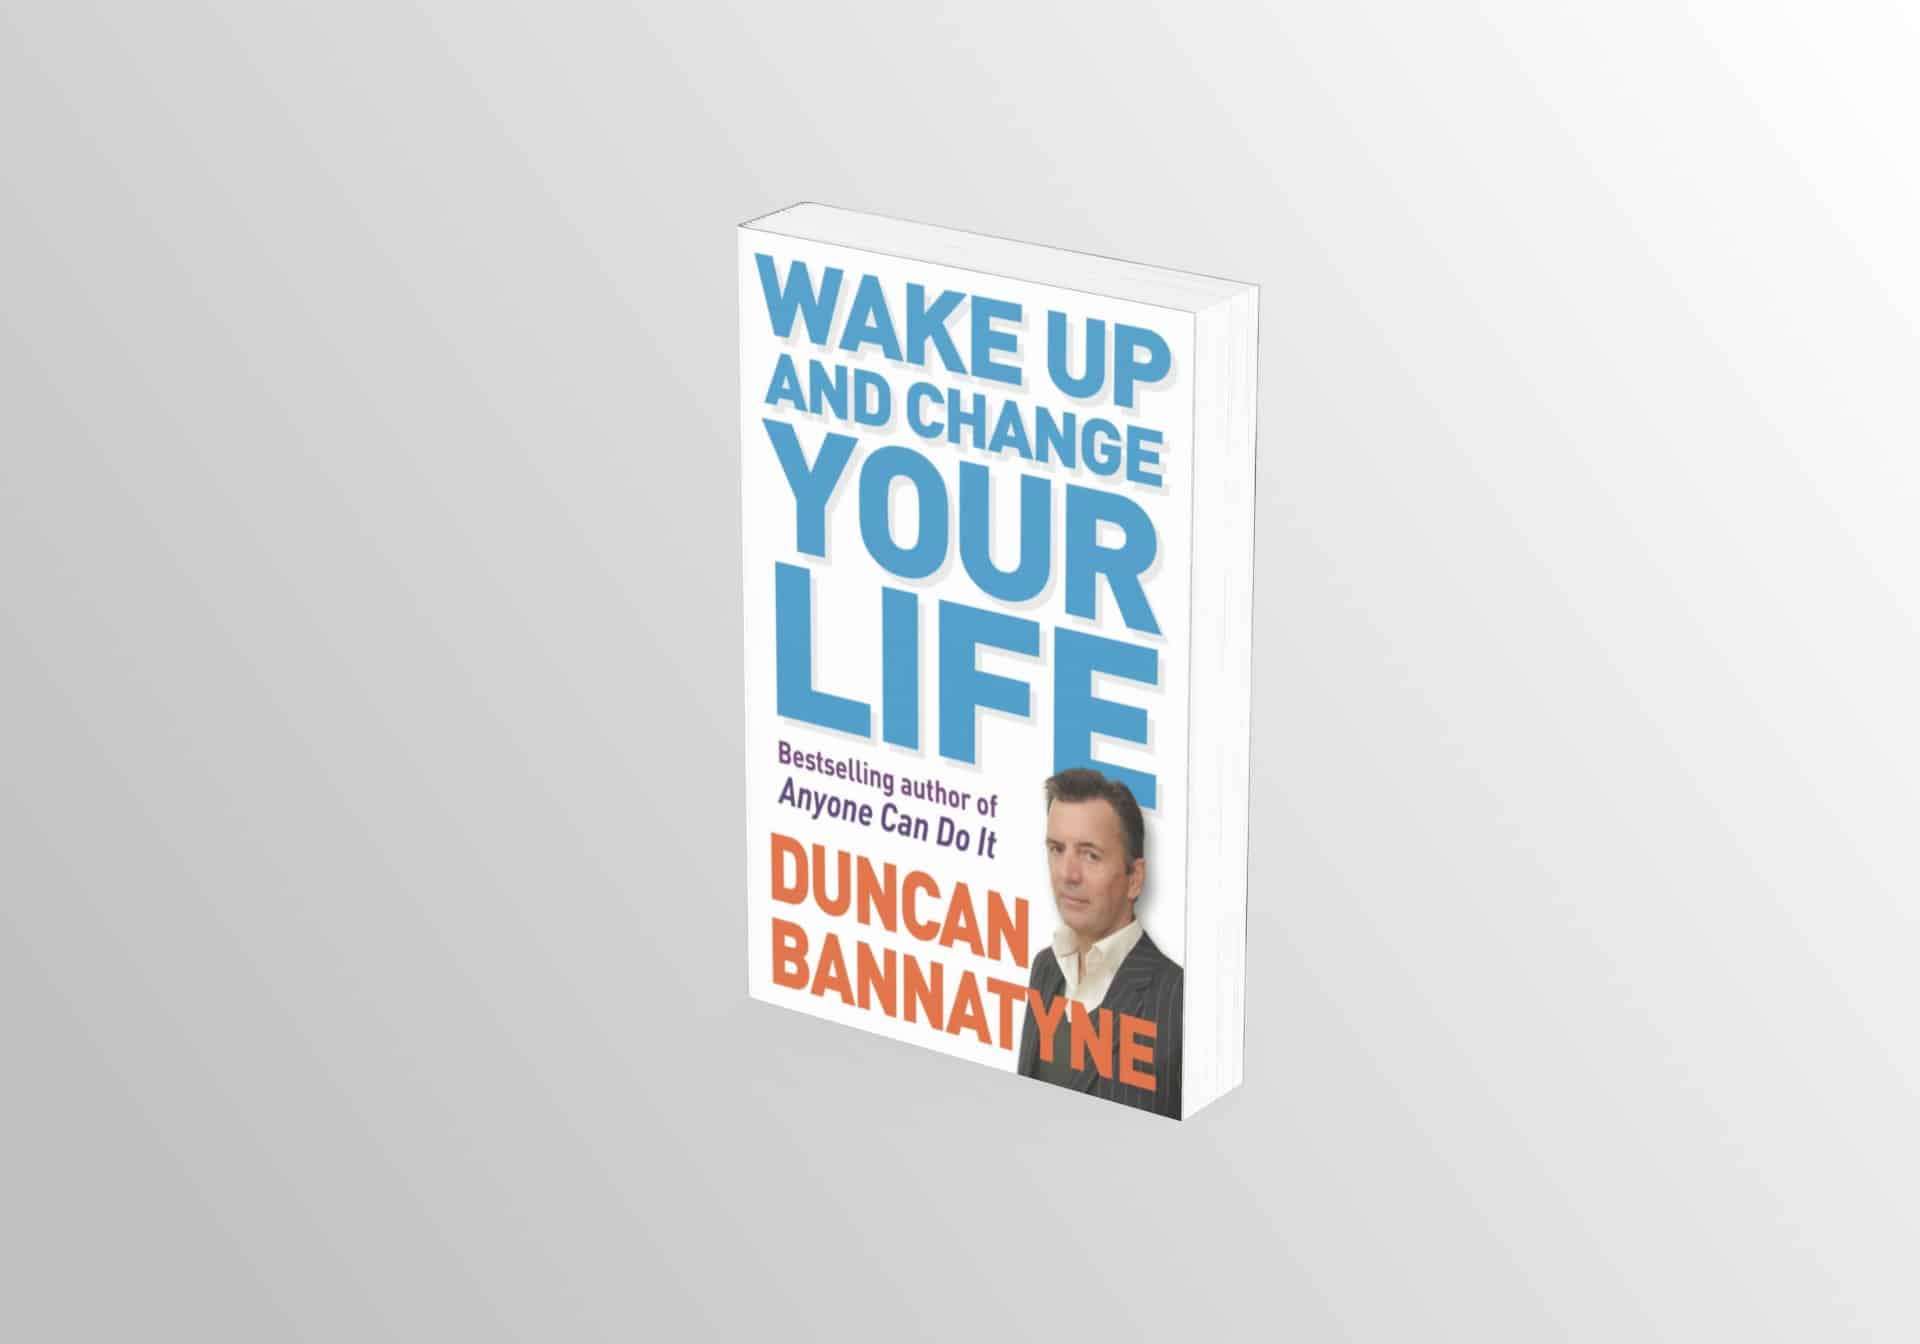 Wake Up and Change Your Life by Duncan Bannatyne